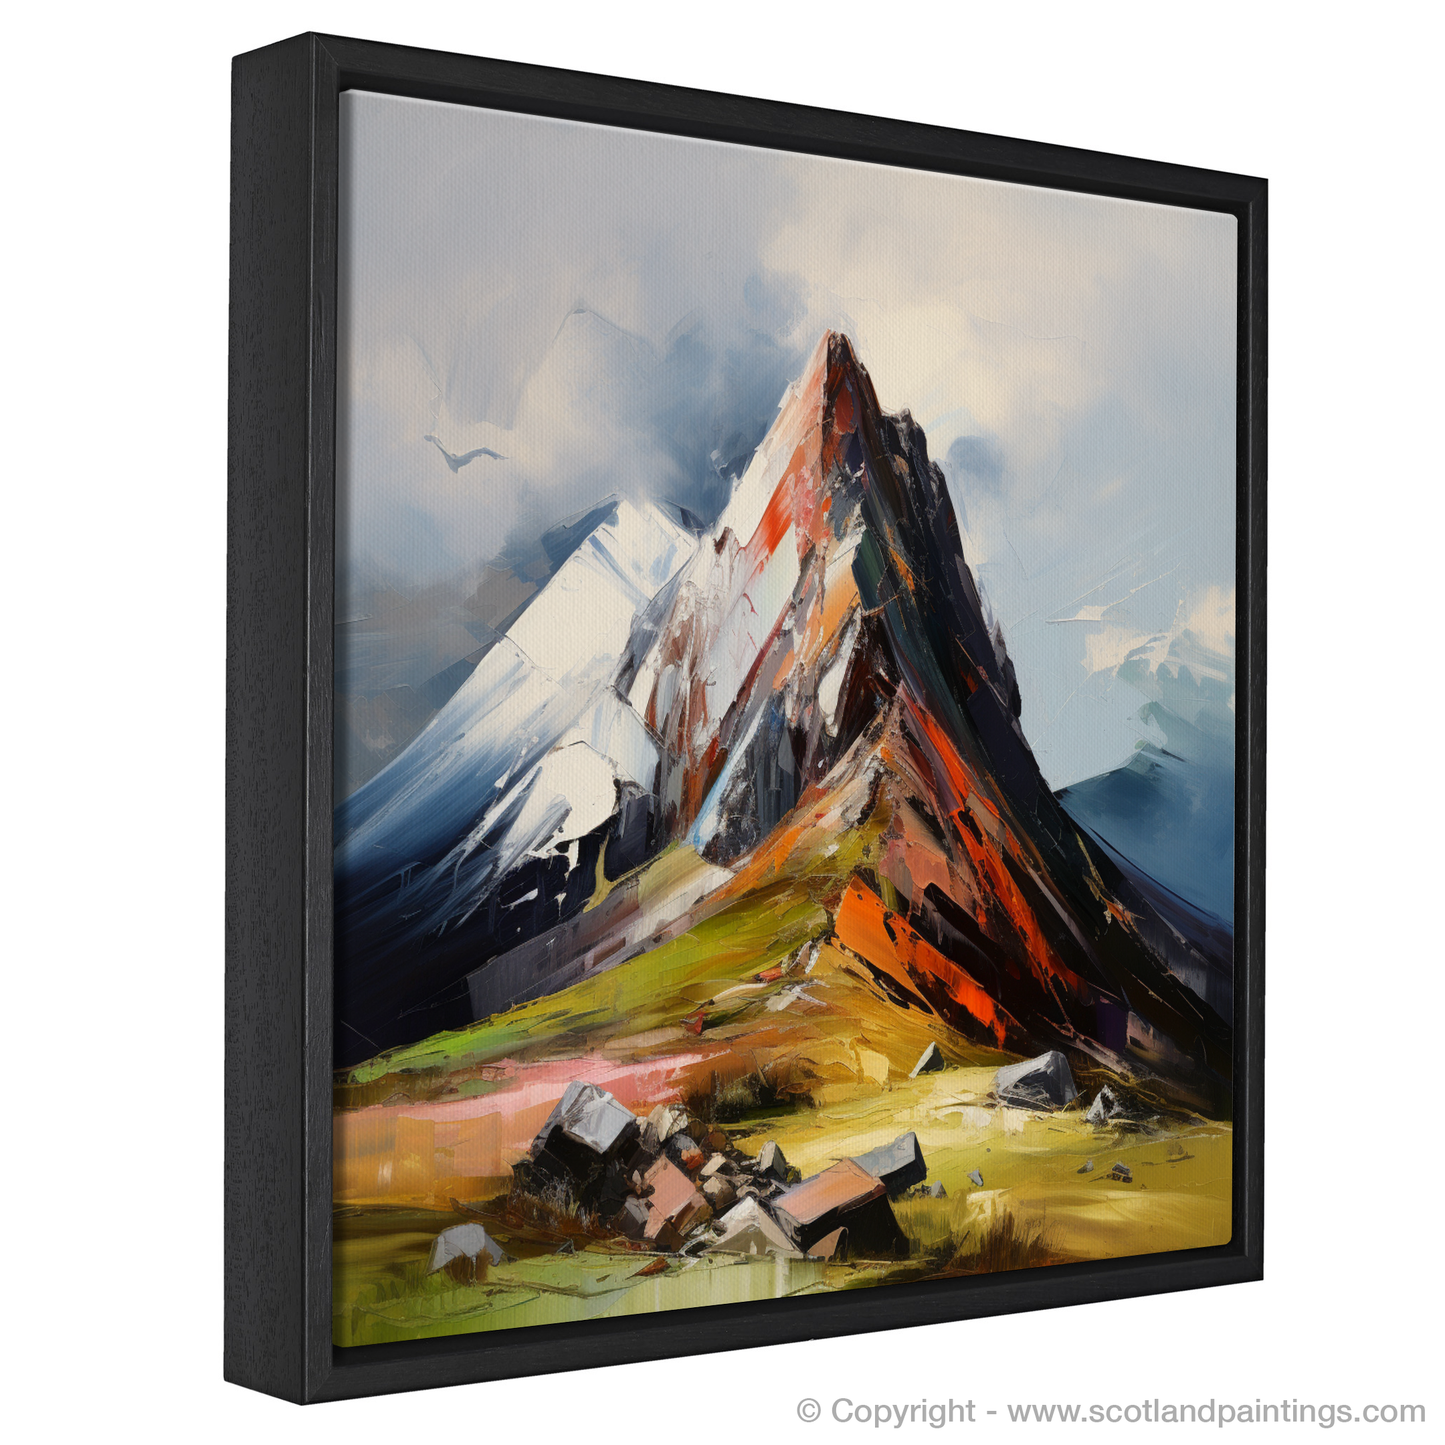 Painting and Art Print of Cairn Gorm, Highlands entitled "Highland Majesty: Cairn Gorm Unveiled".